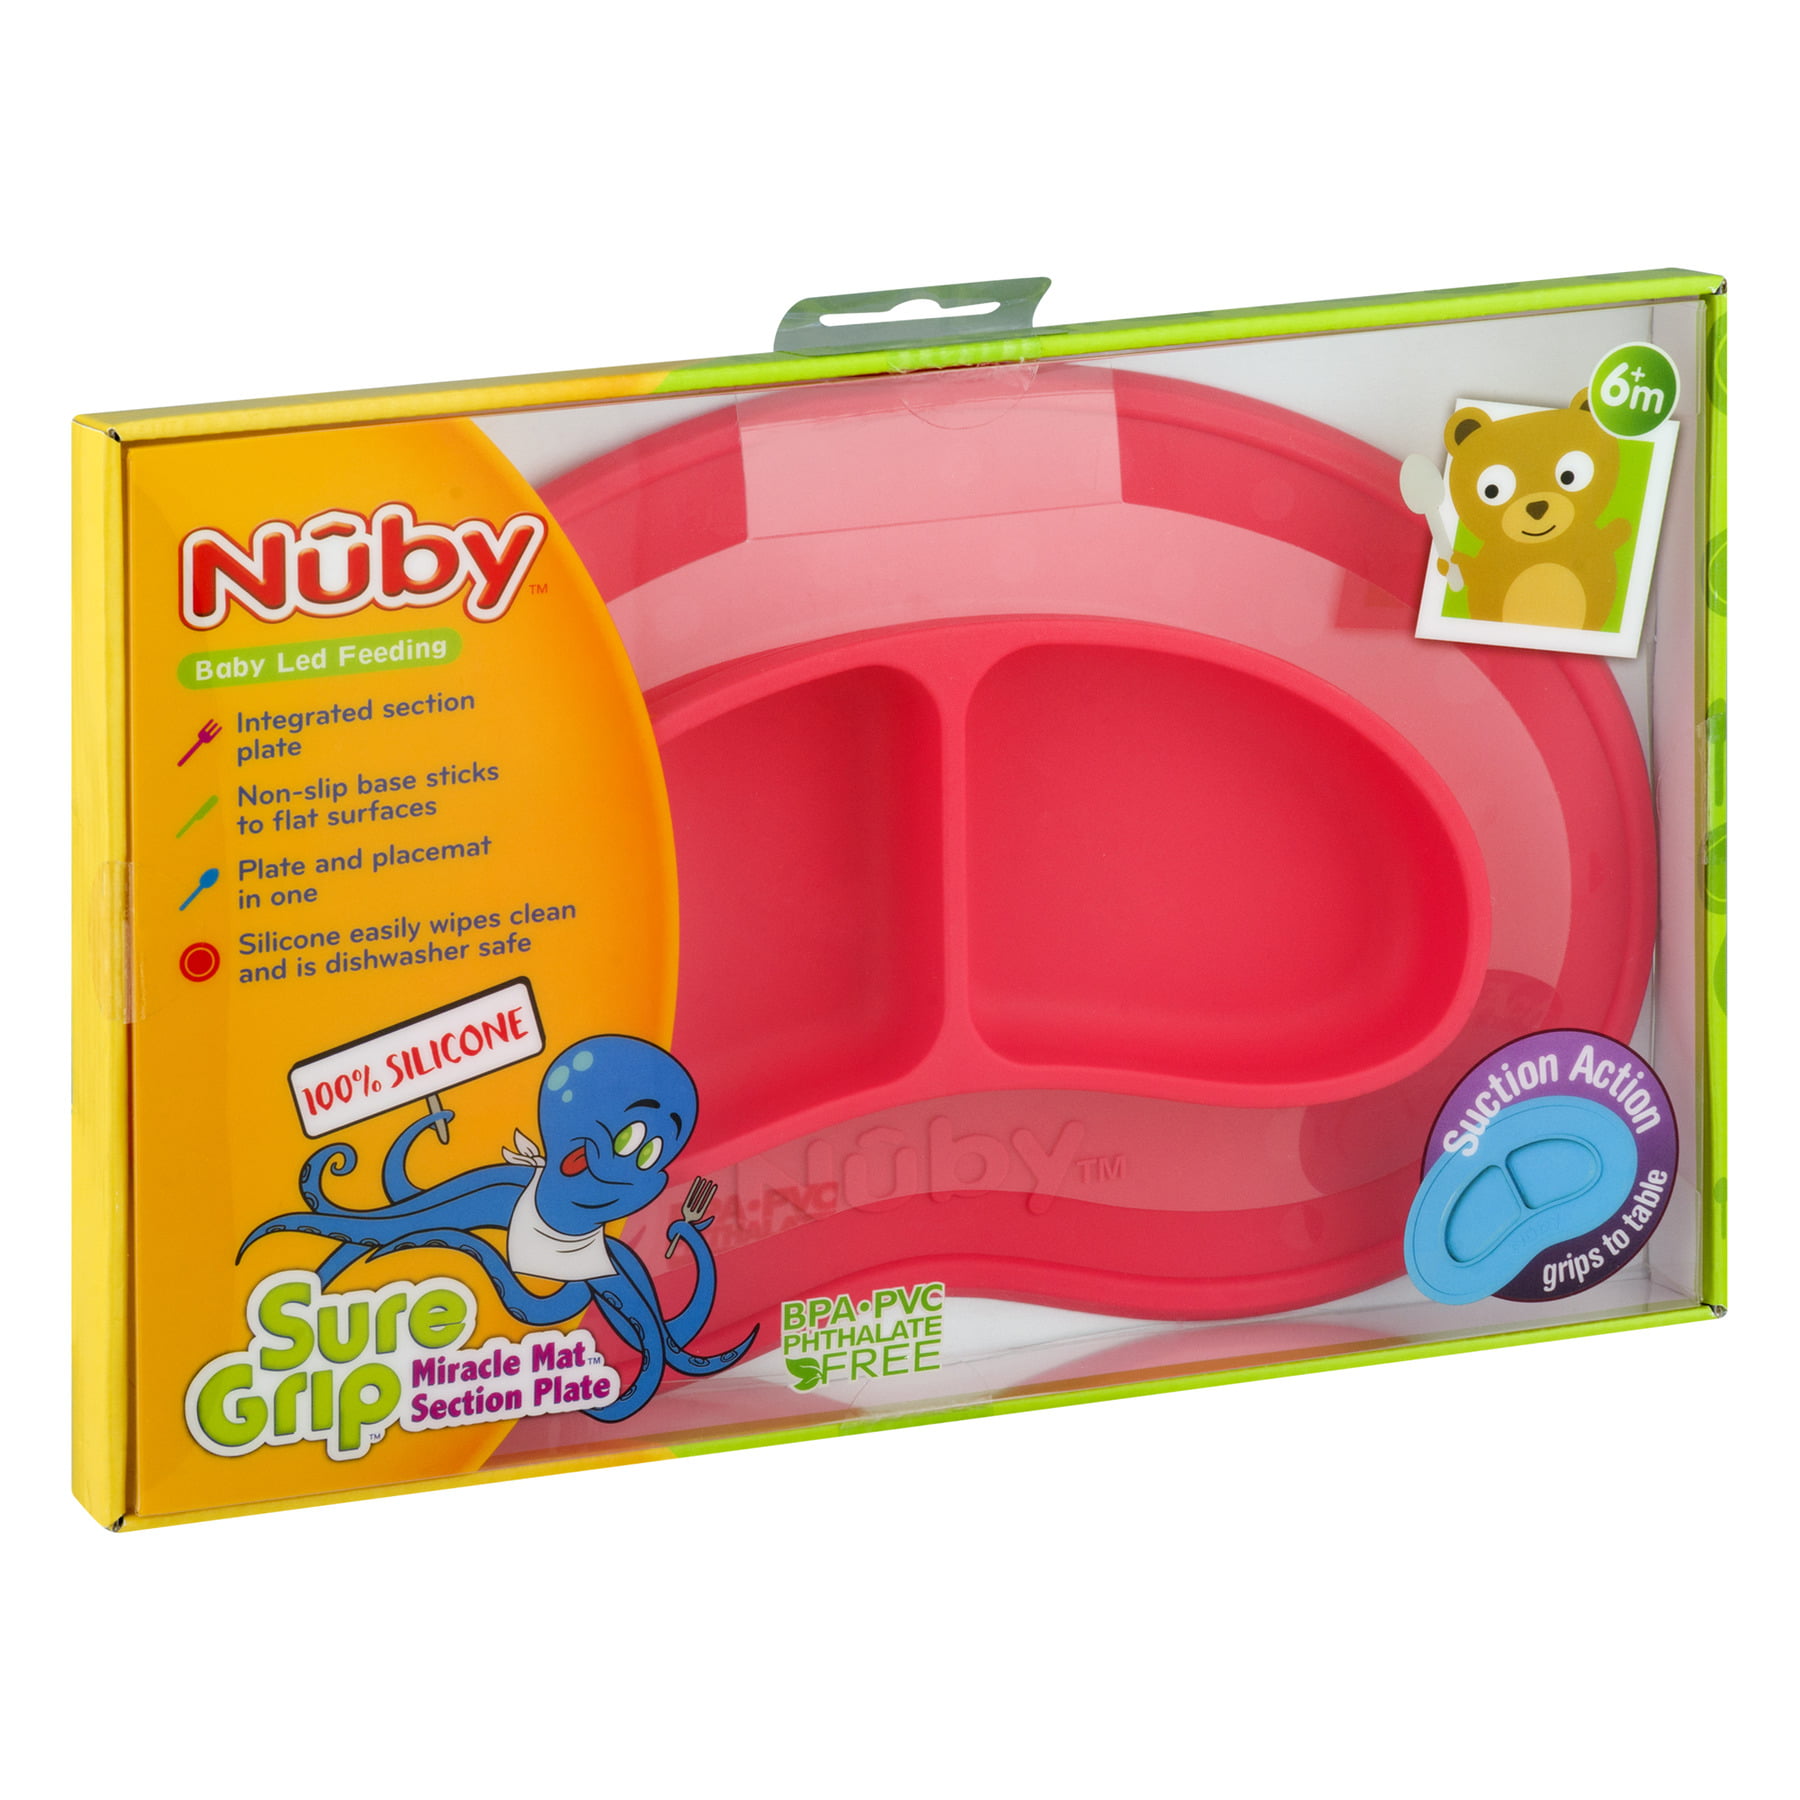 Nuby Sure Grip Miracle Mat Section Plate,1 Pack Red - Walmart.com